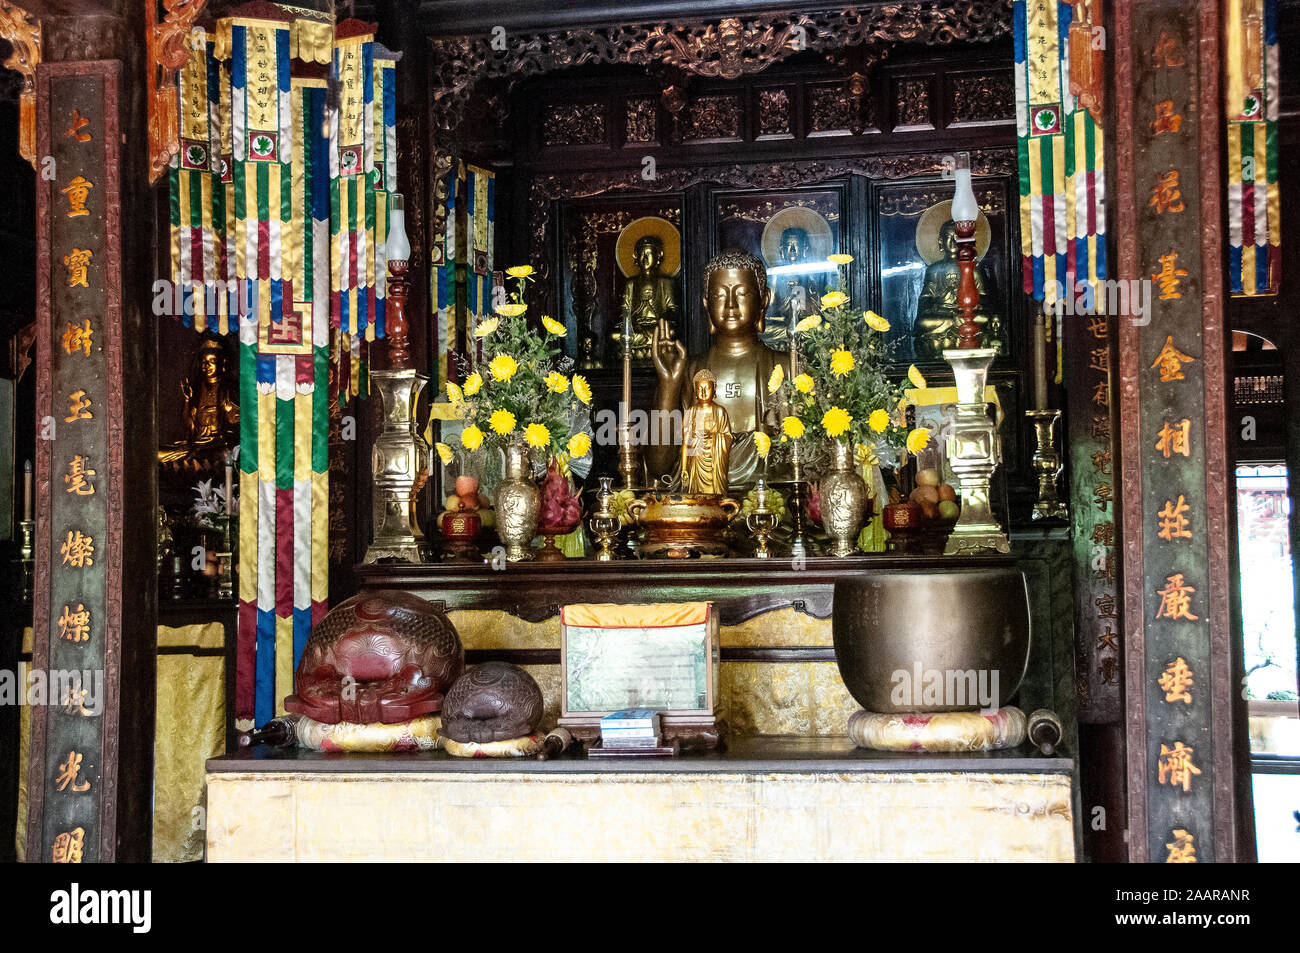 Altar with golden vases is always covered with fresh flowers inside the